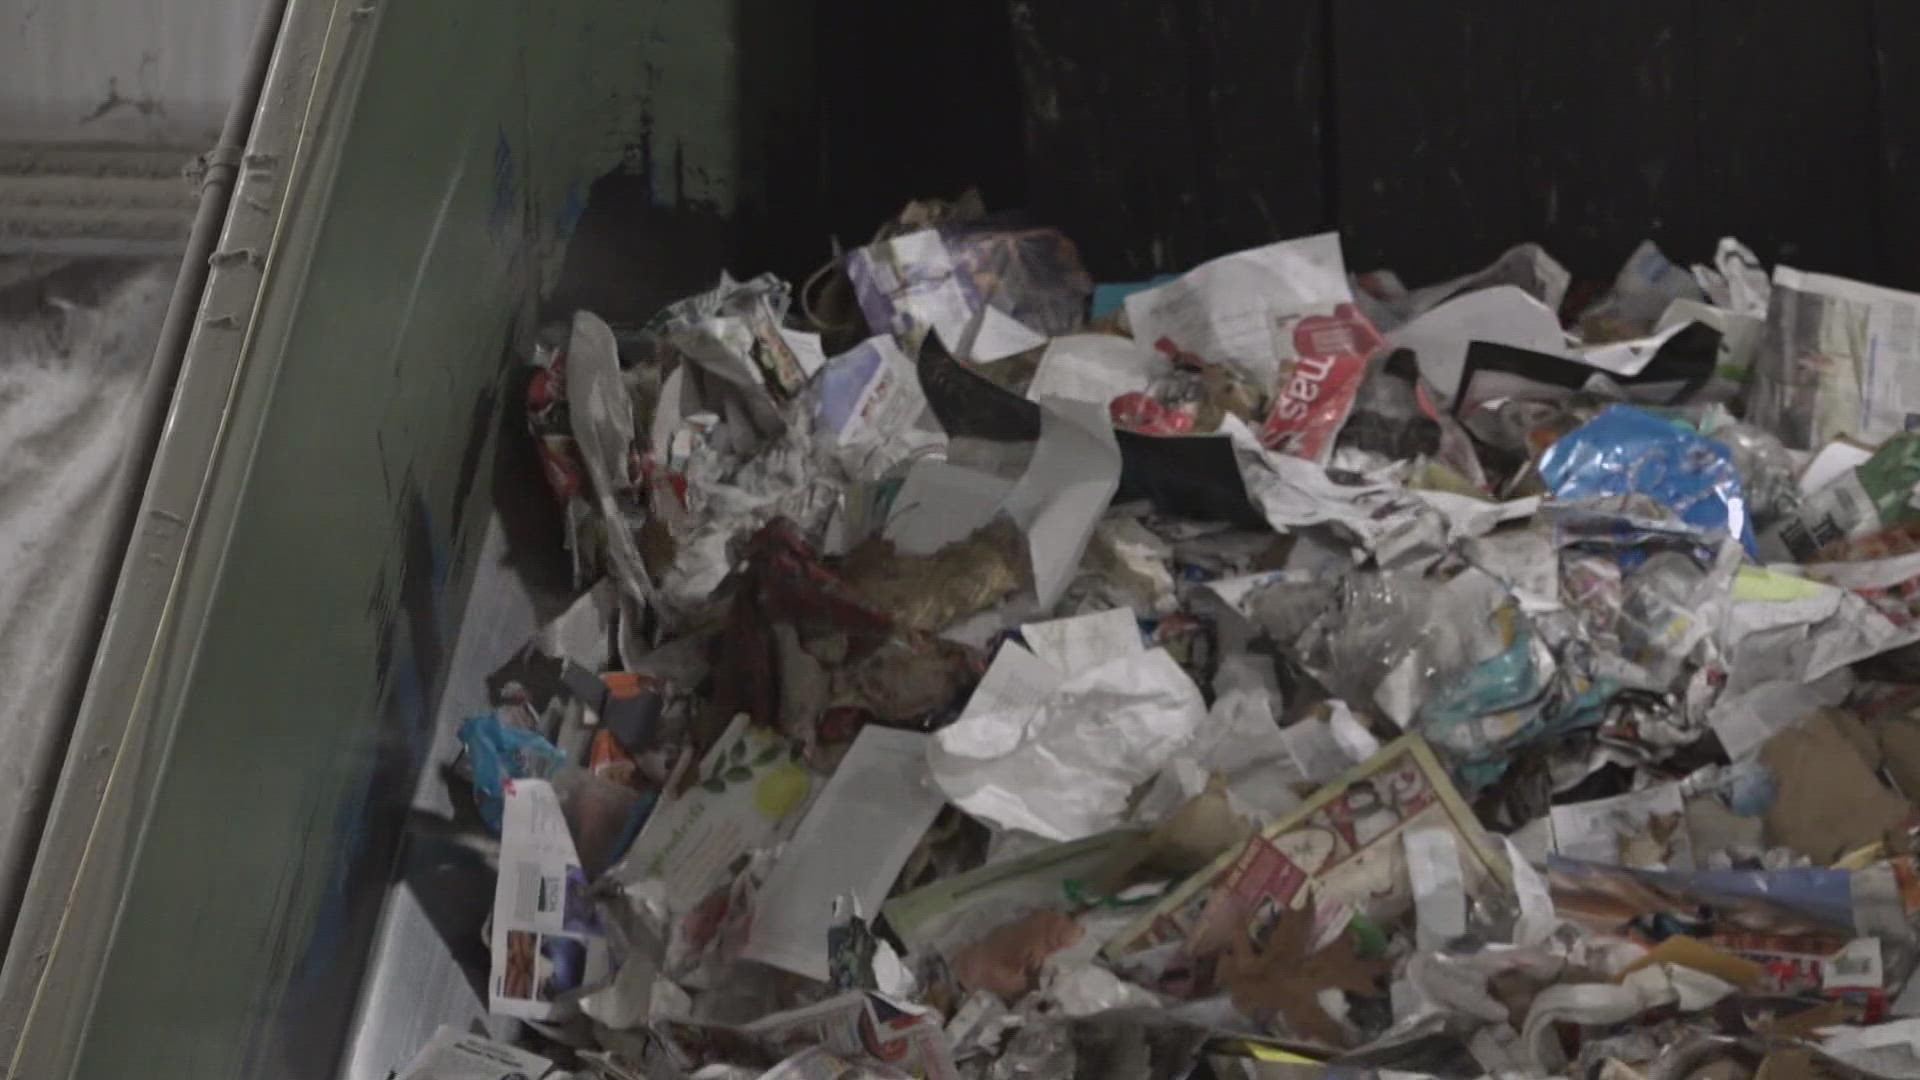 The Maine Department of Environmental Protection's latest report indicates recycling rates were down by nearly five percent in 2021 compared to 2017.